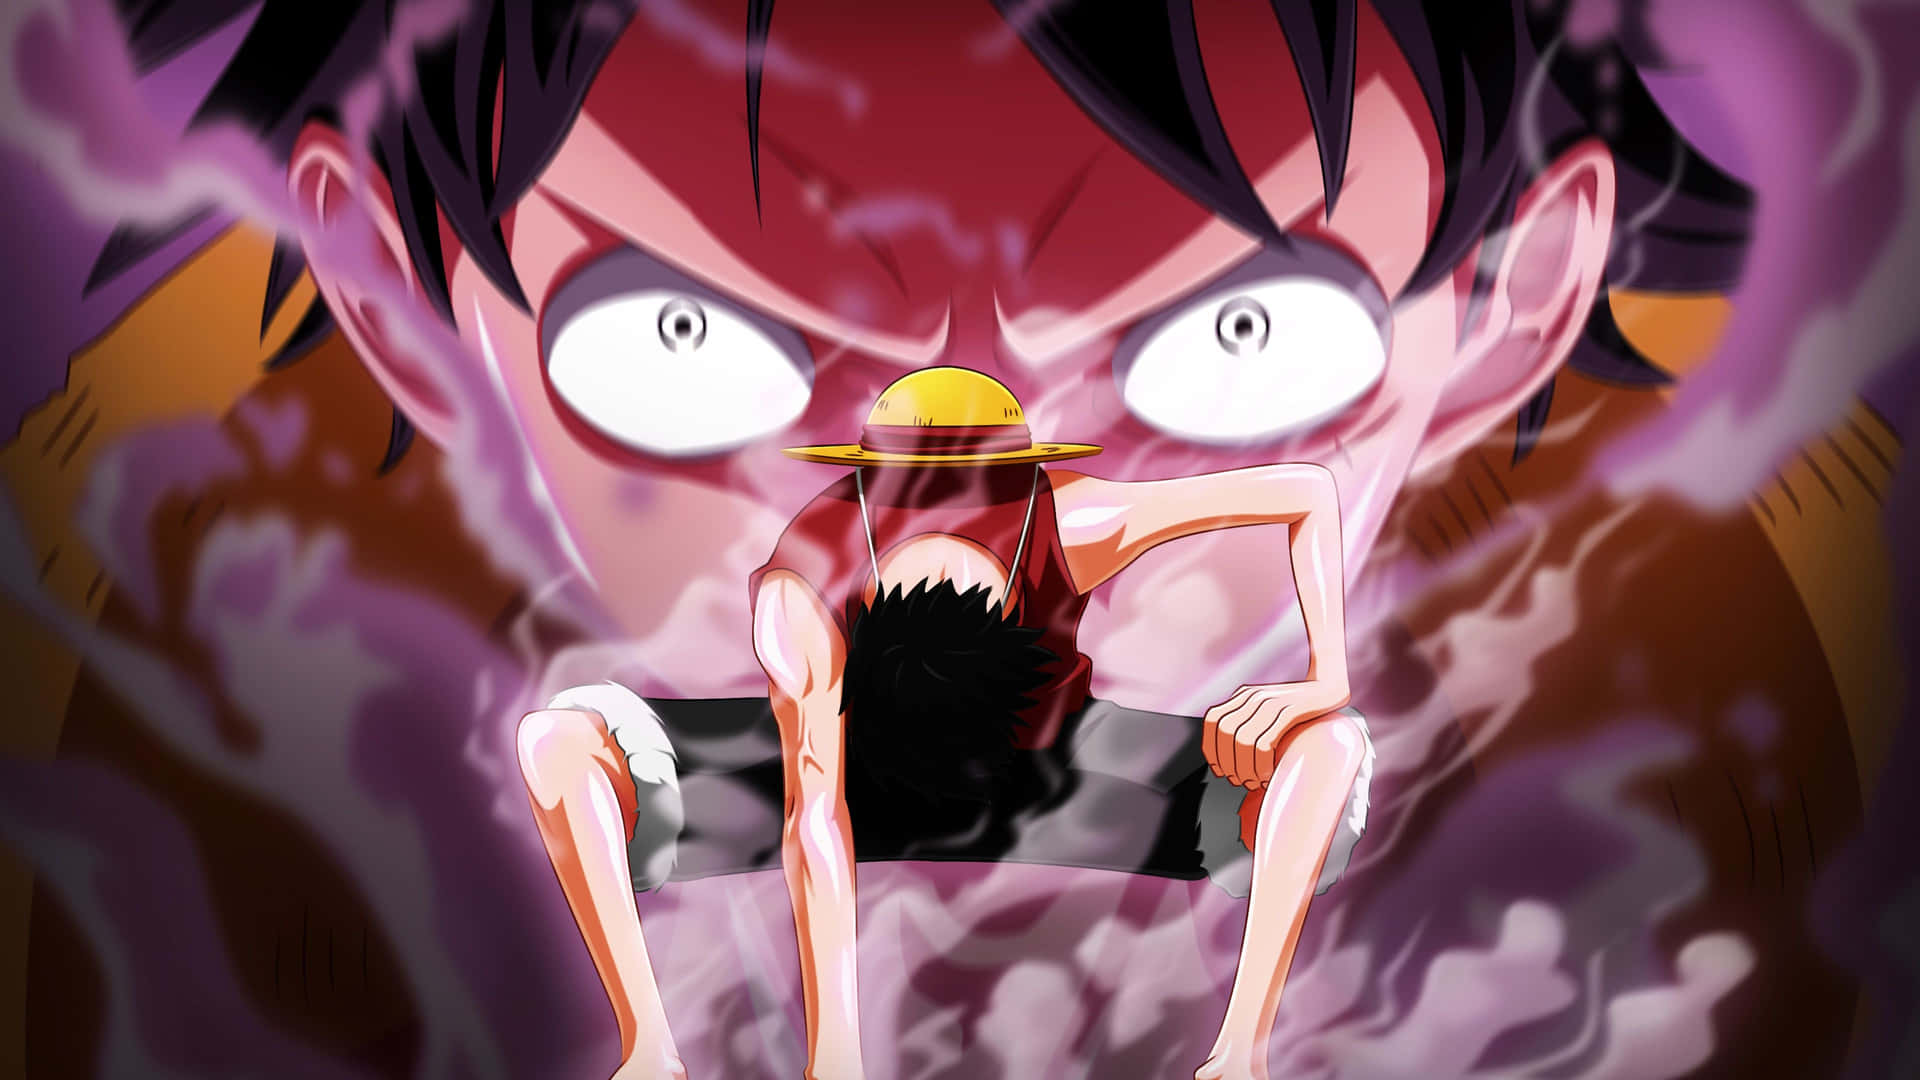 Image  Luffy, the Captain of the Straw Hat Pirates